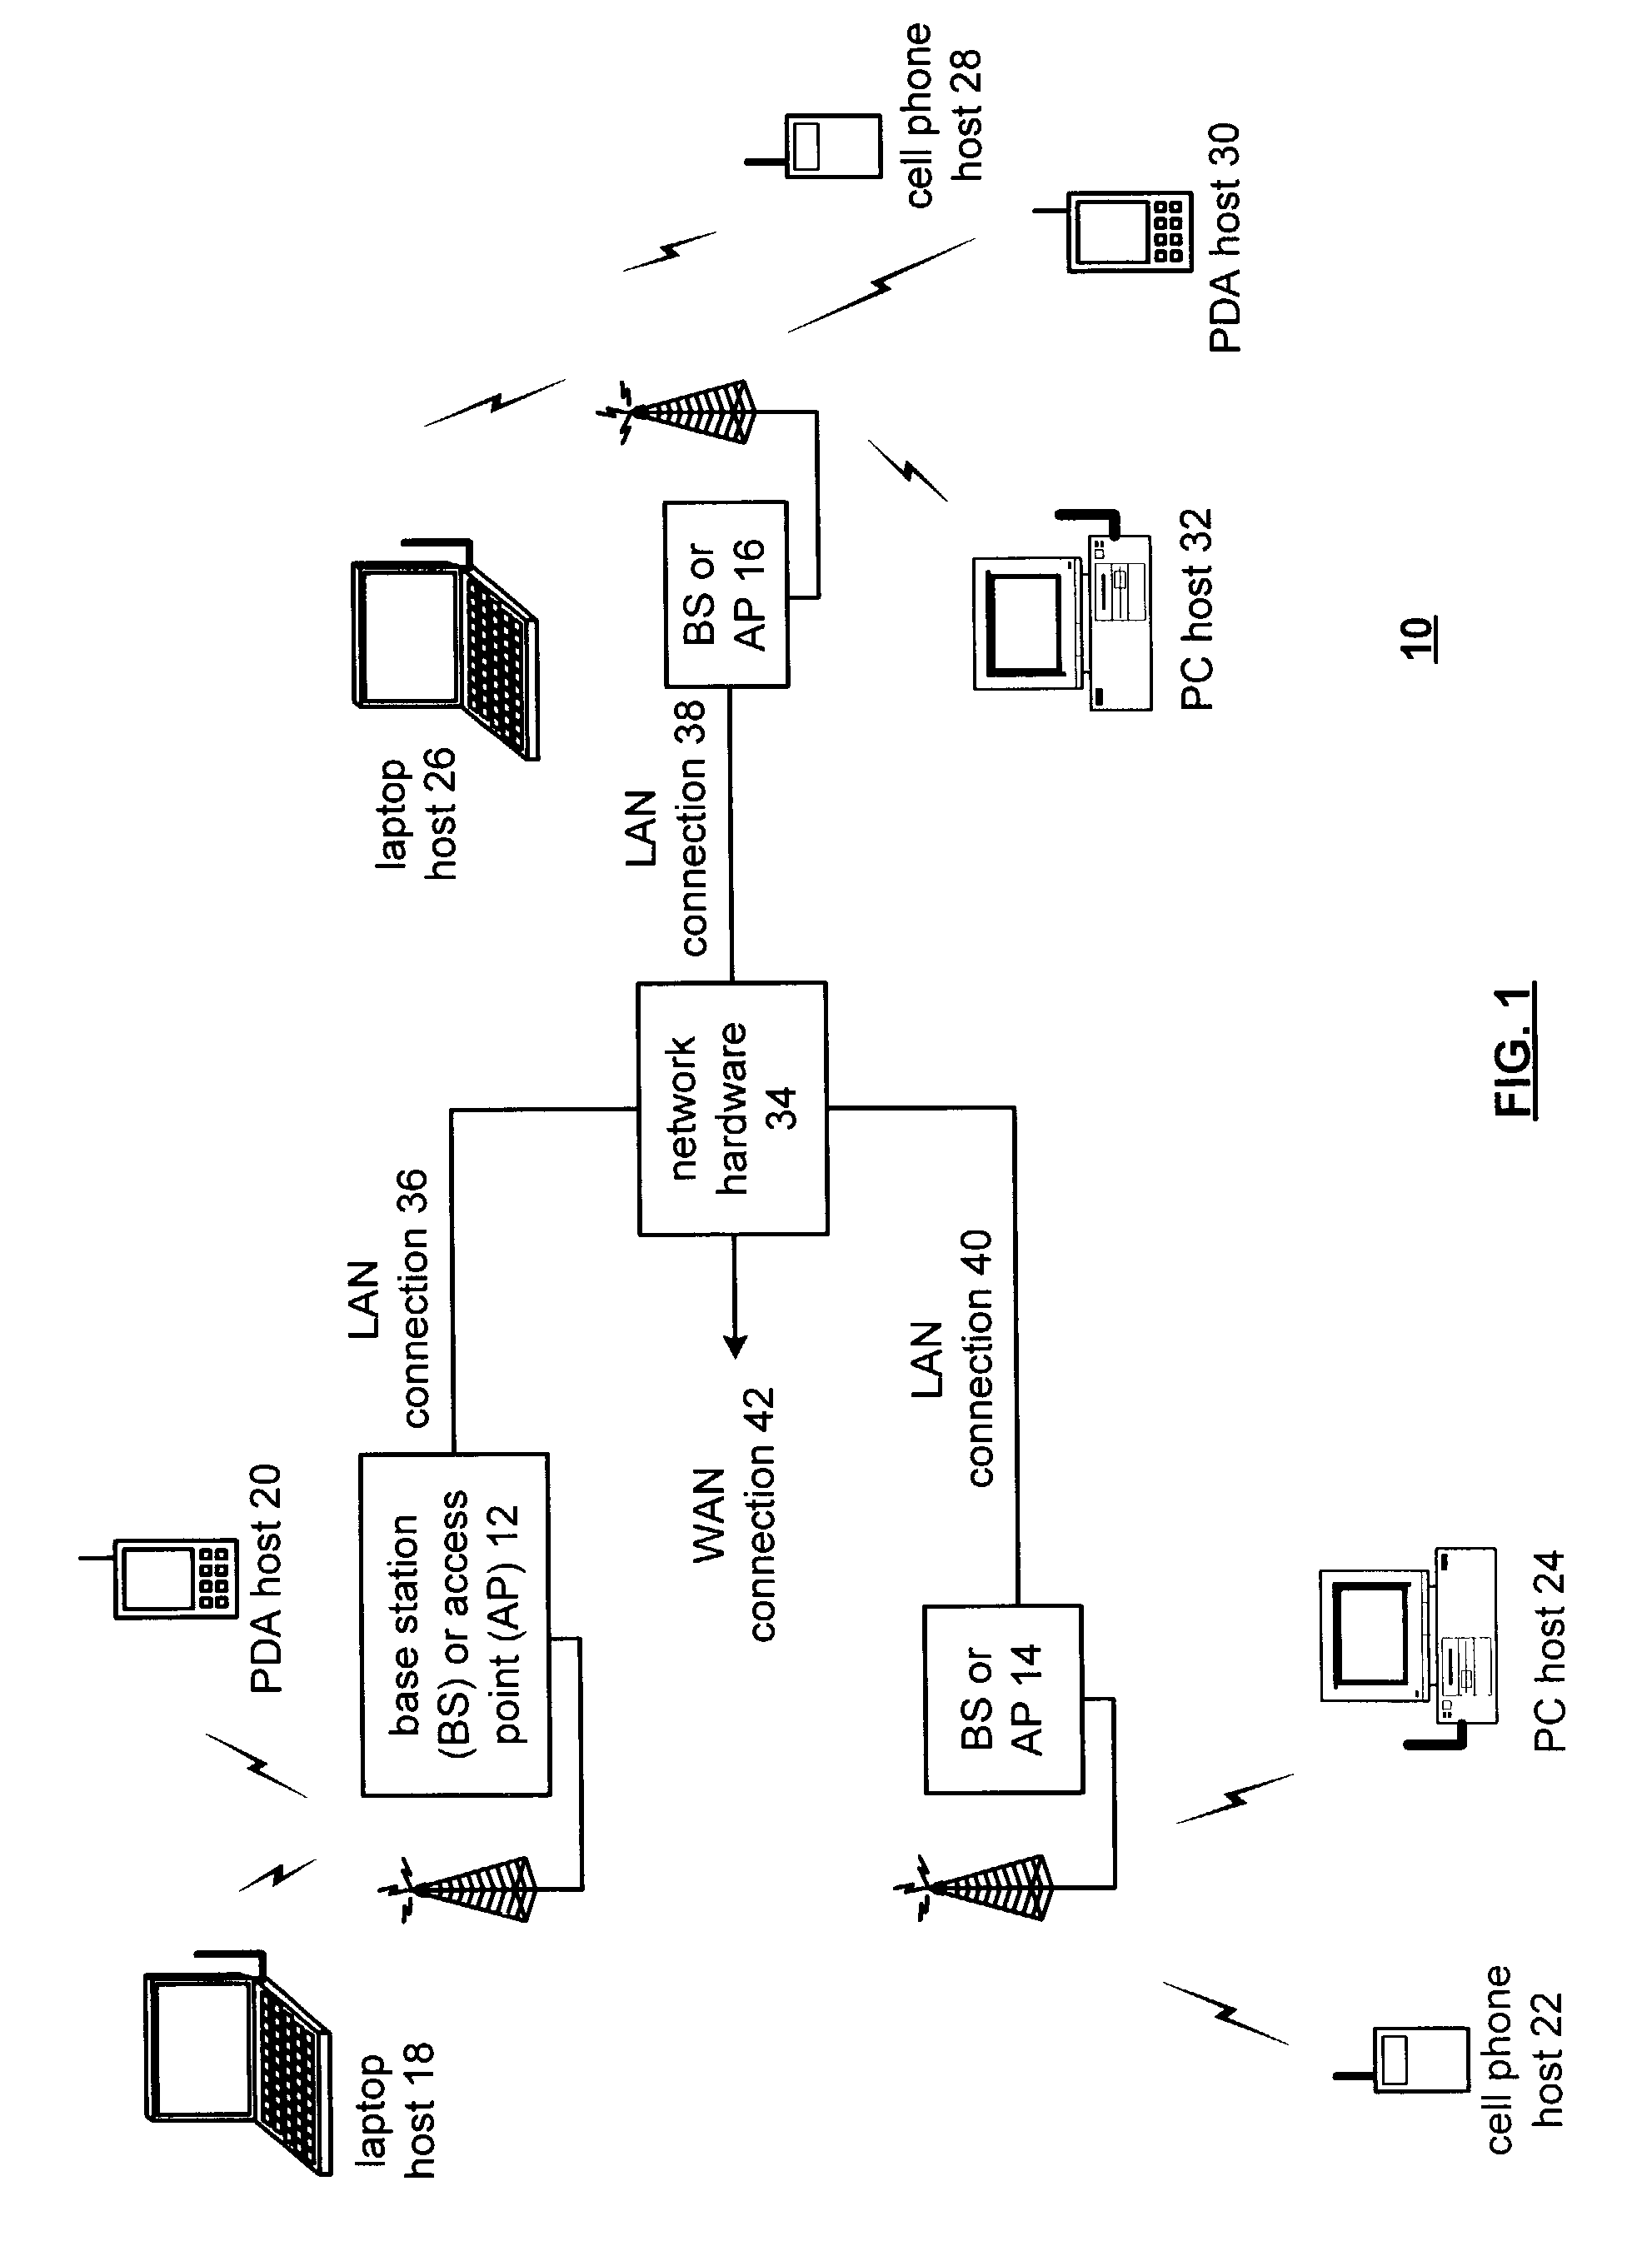 Radio frequency integrated circuit electro-static discharge circuit